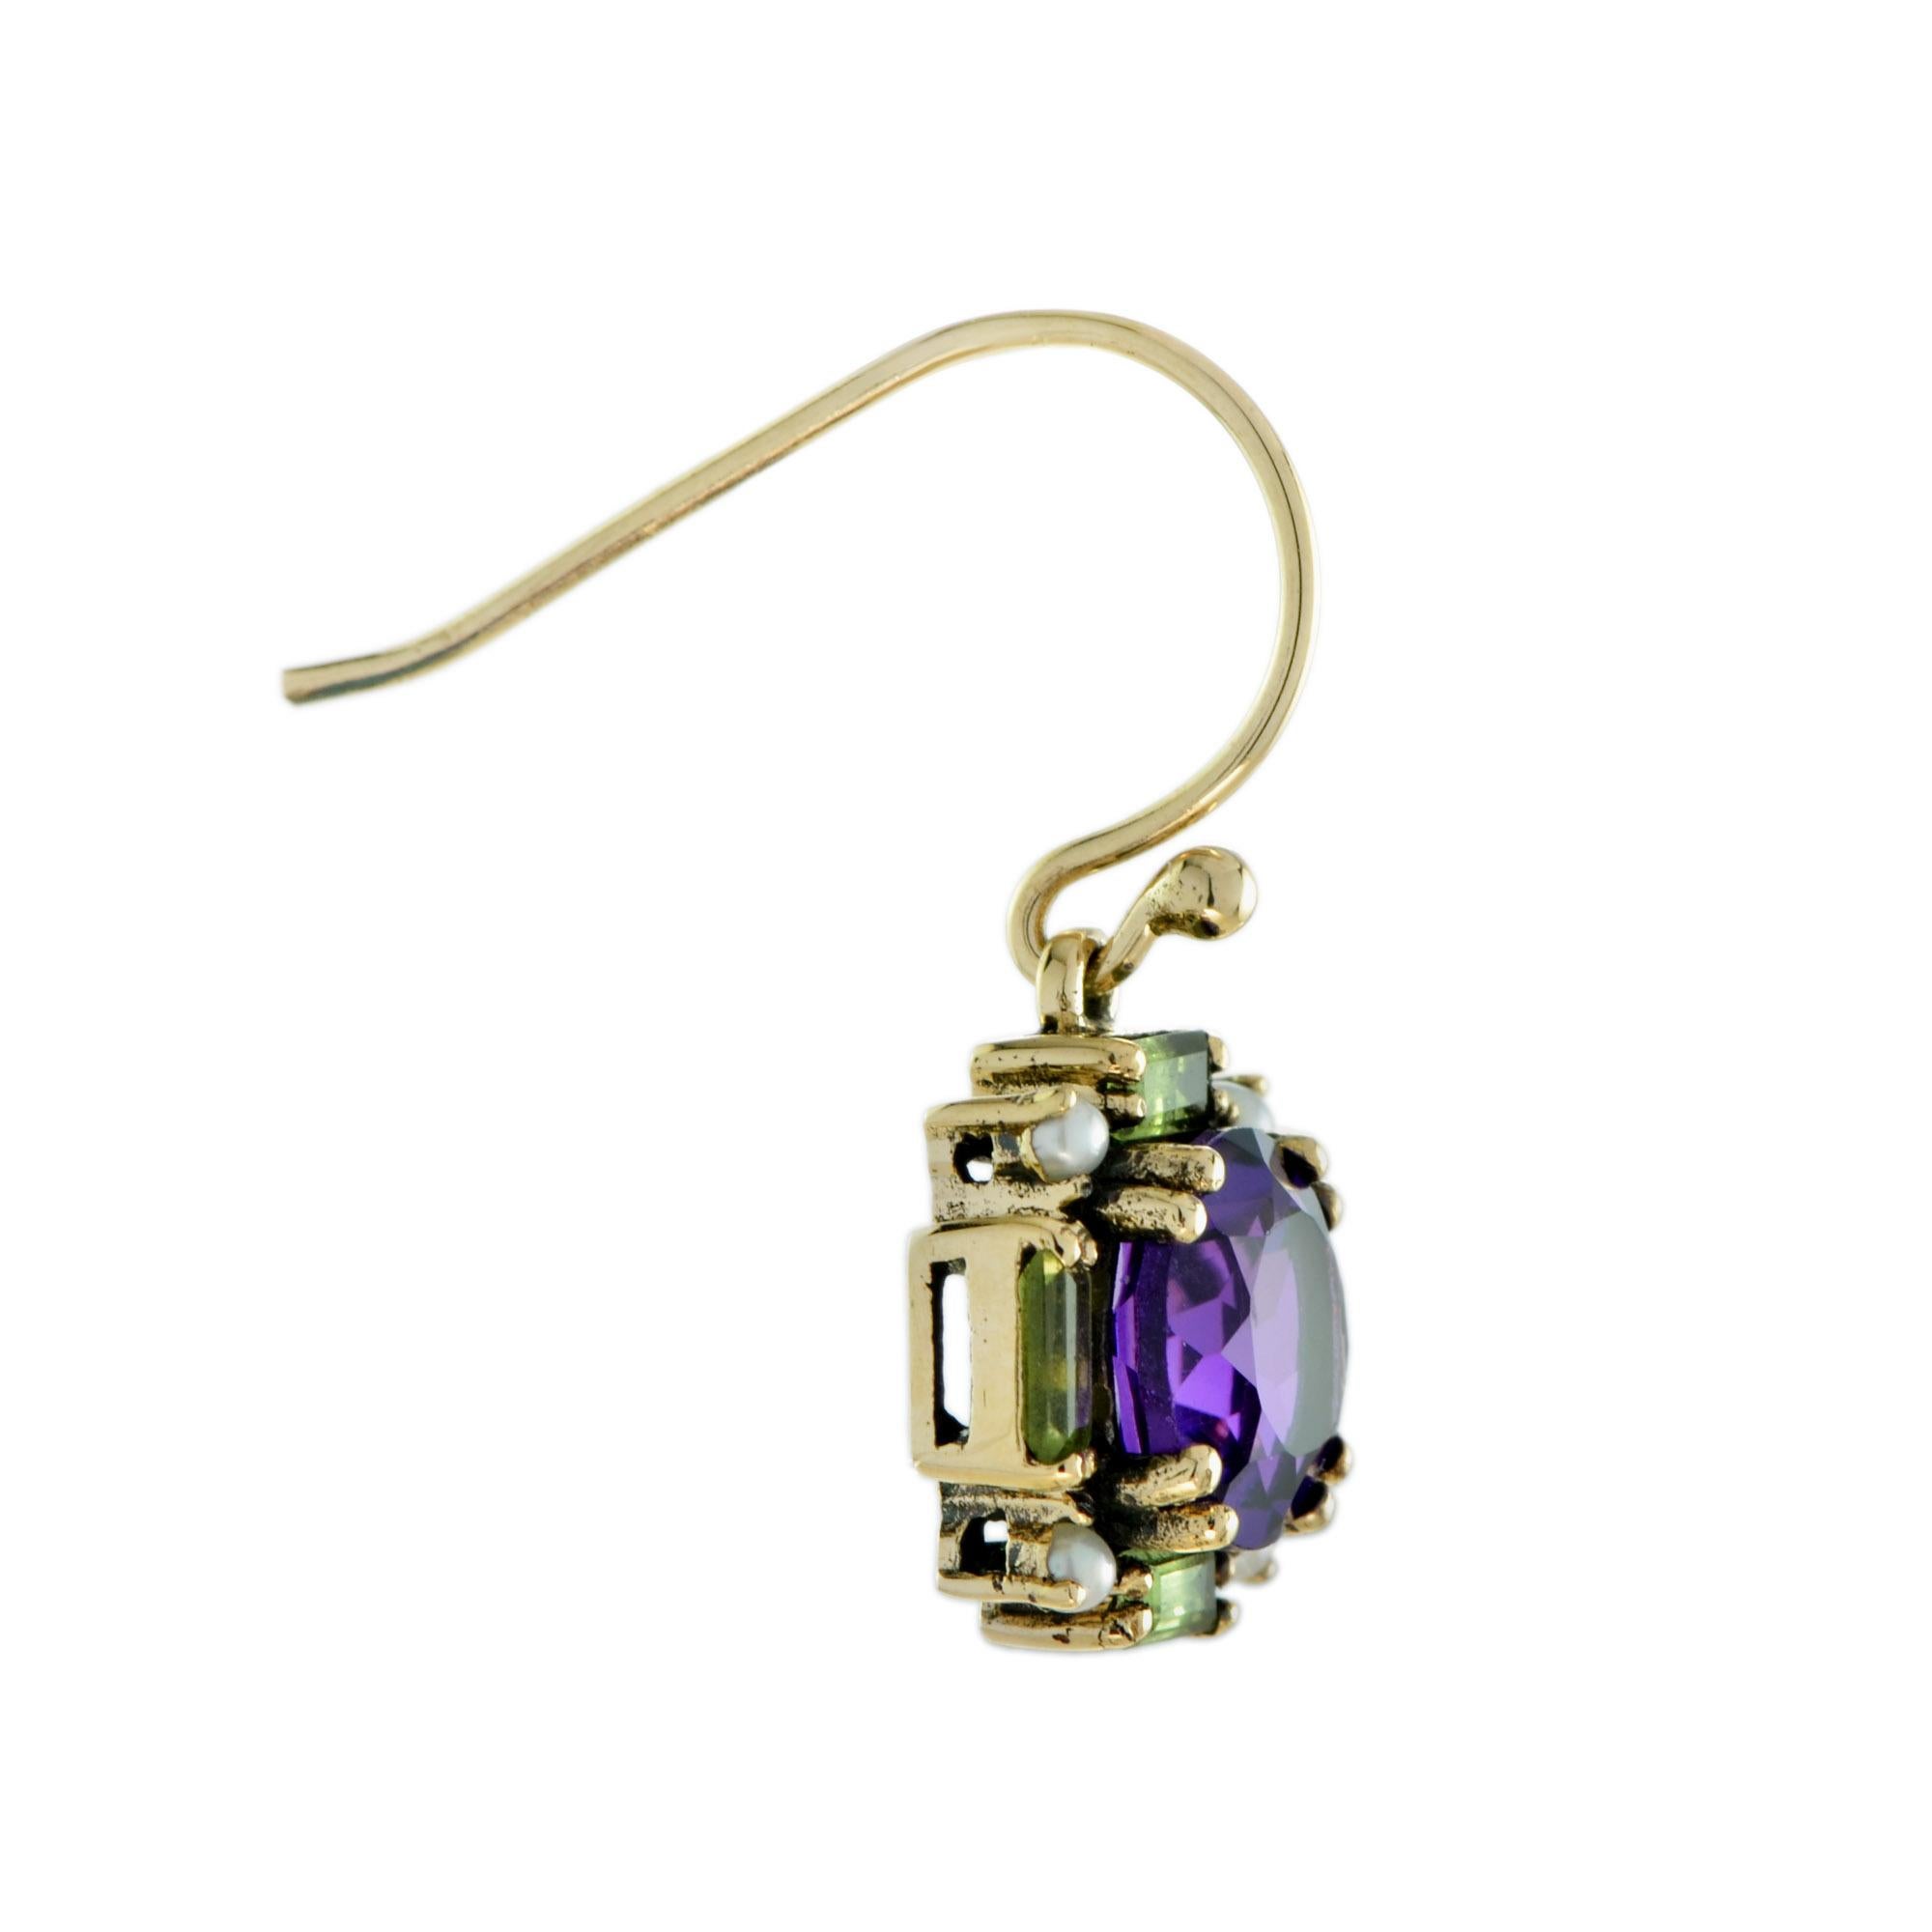 Exquisitely round cut amethyst are handset into 9k yellow gold, bordered by brilliant green baguette cut peridots and pearls. A lovely pair to add colors to your day.

Earrings Information
Metal: 9K Yellow Gold (oxidized)
Width: 12 mm.
Length: 25